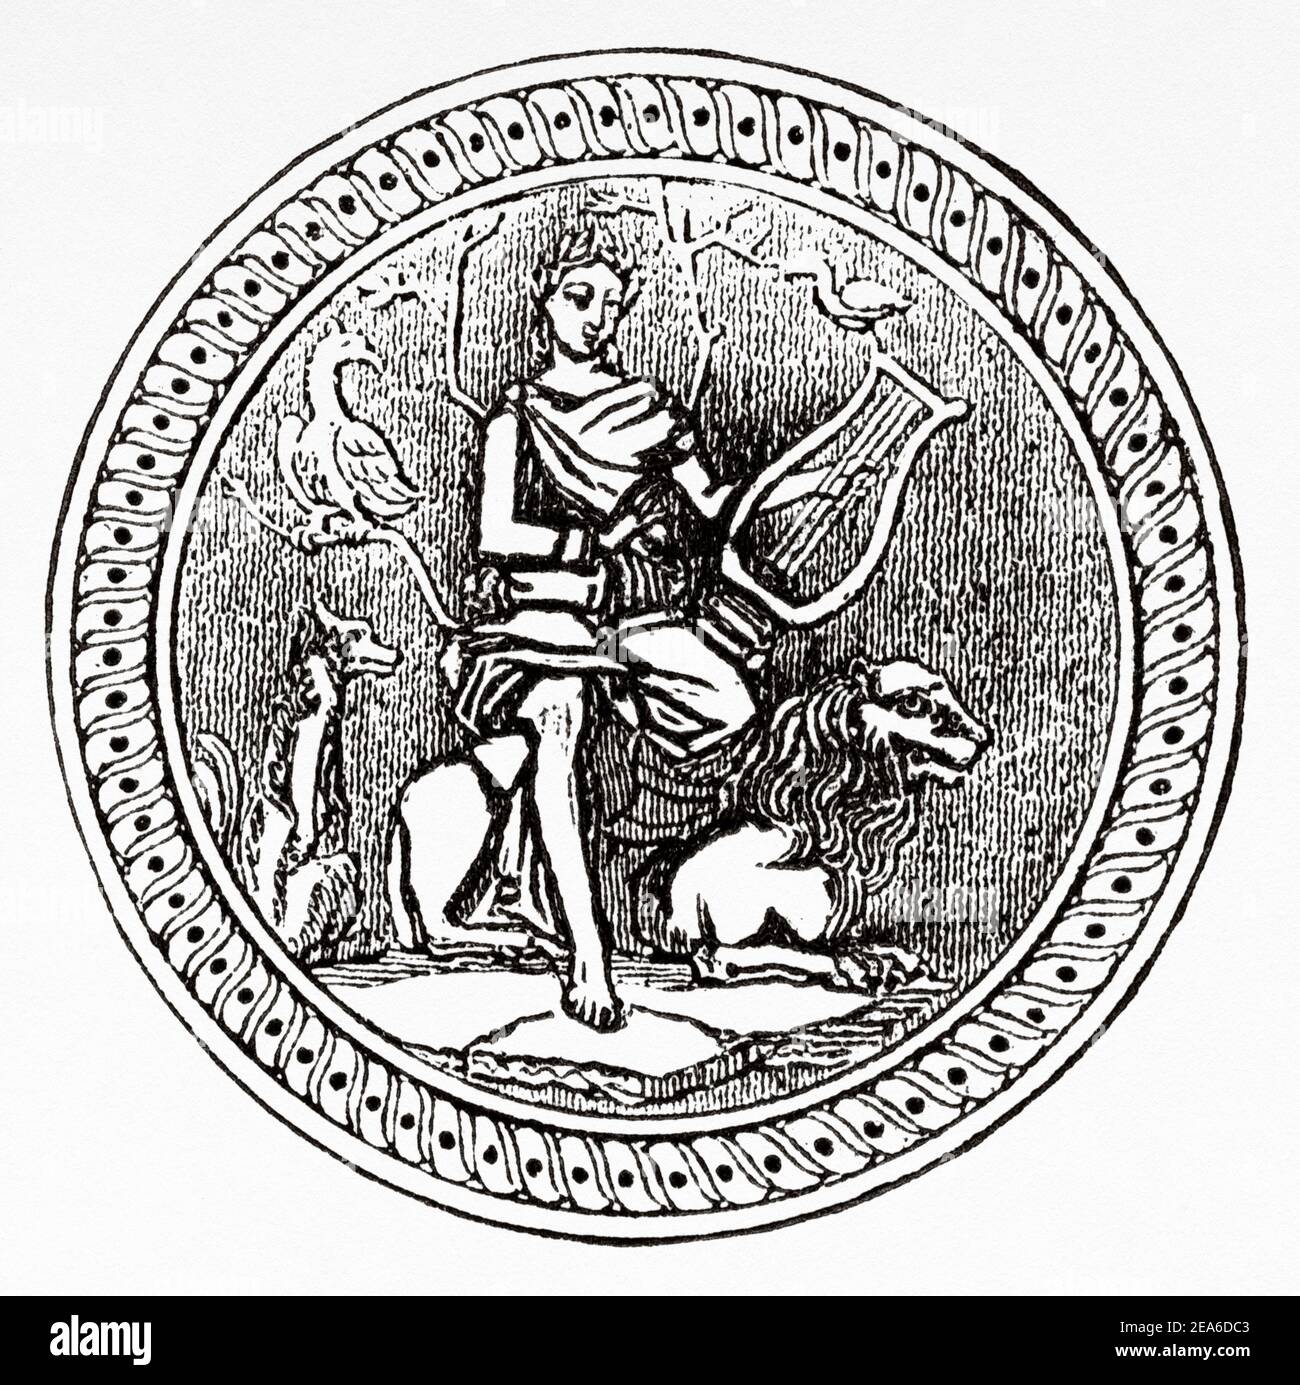 Orpheus attracting wild animals to the sound of his lyre, greek mythology character. Ancient Greece History. Old 19th century engraved illustration from El Mundo Ilustrado 1879 Stock Photo